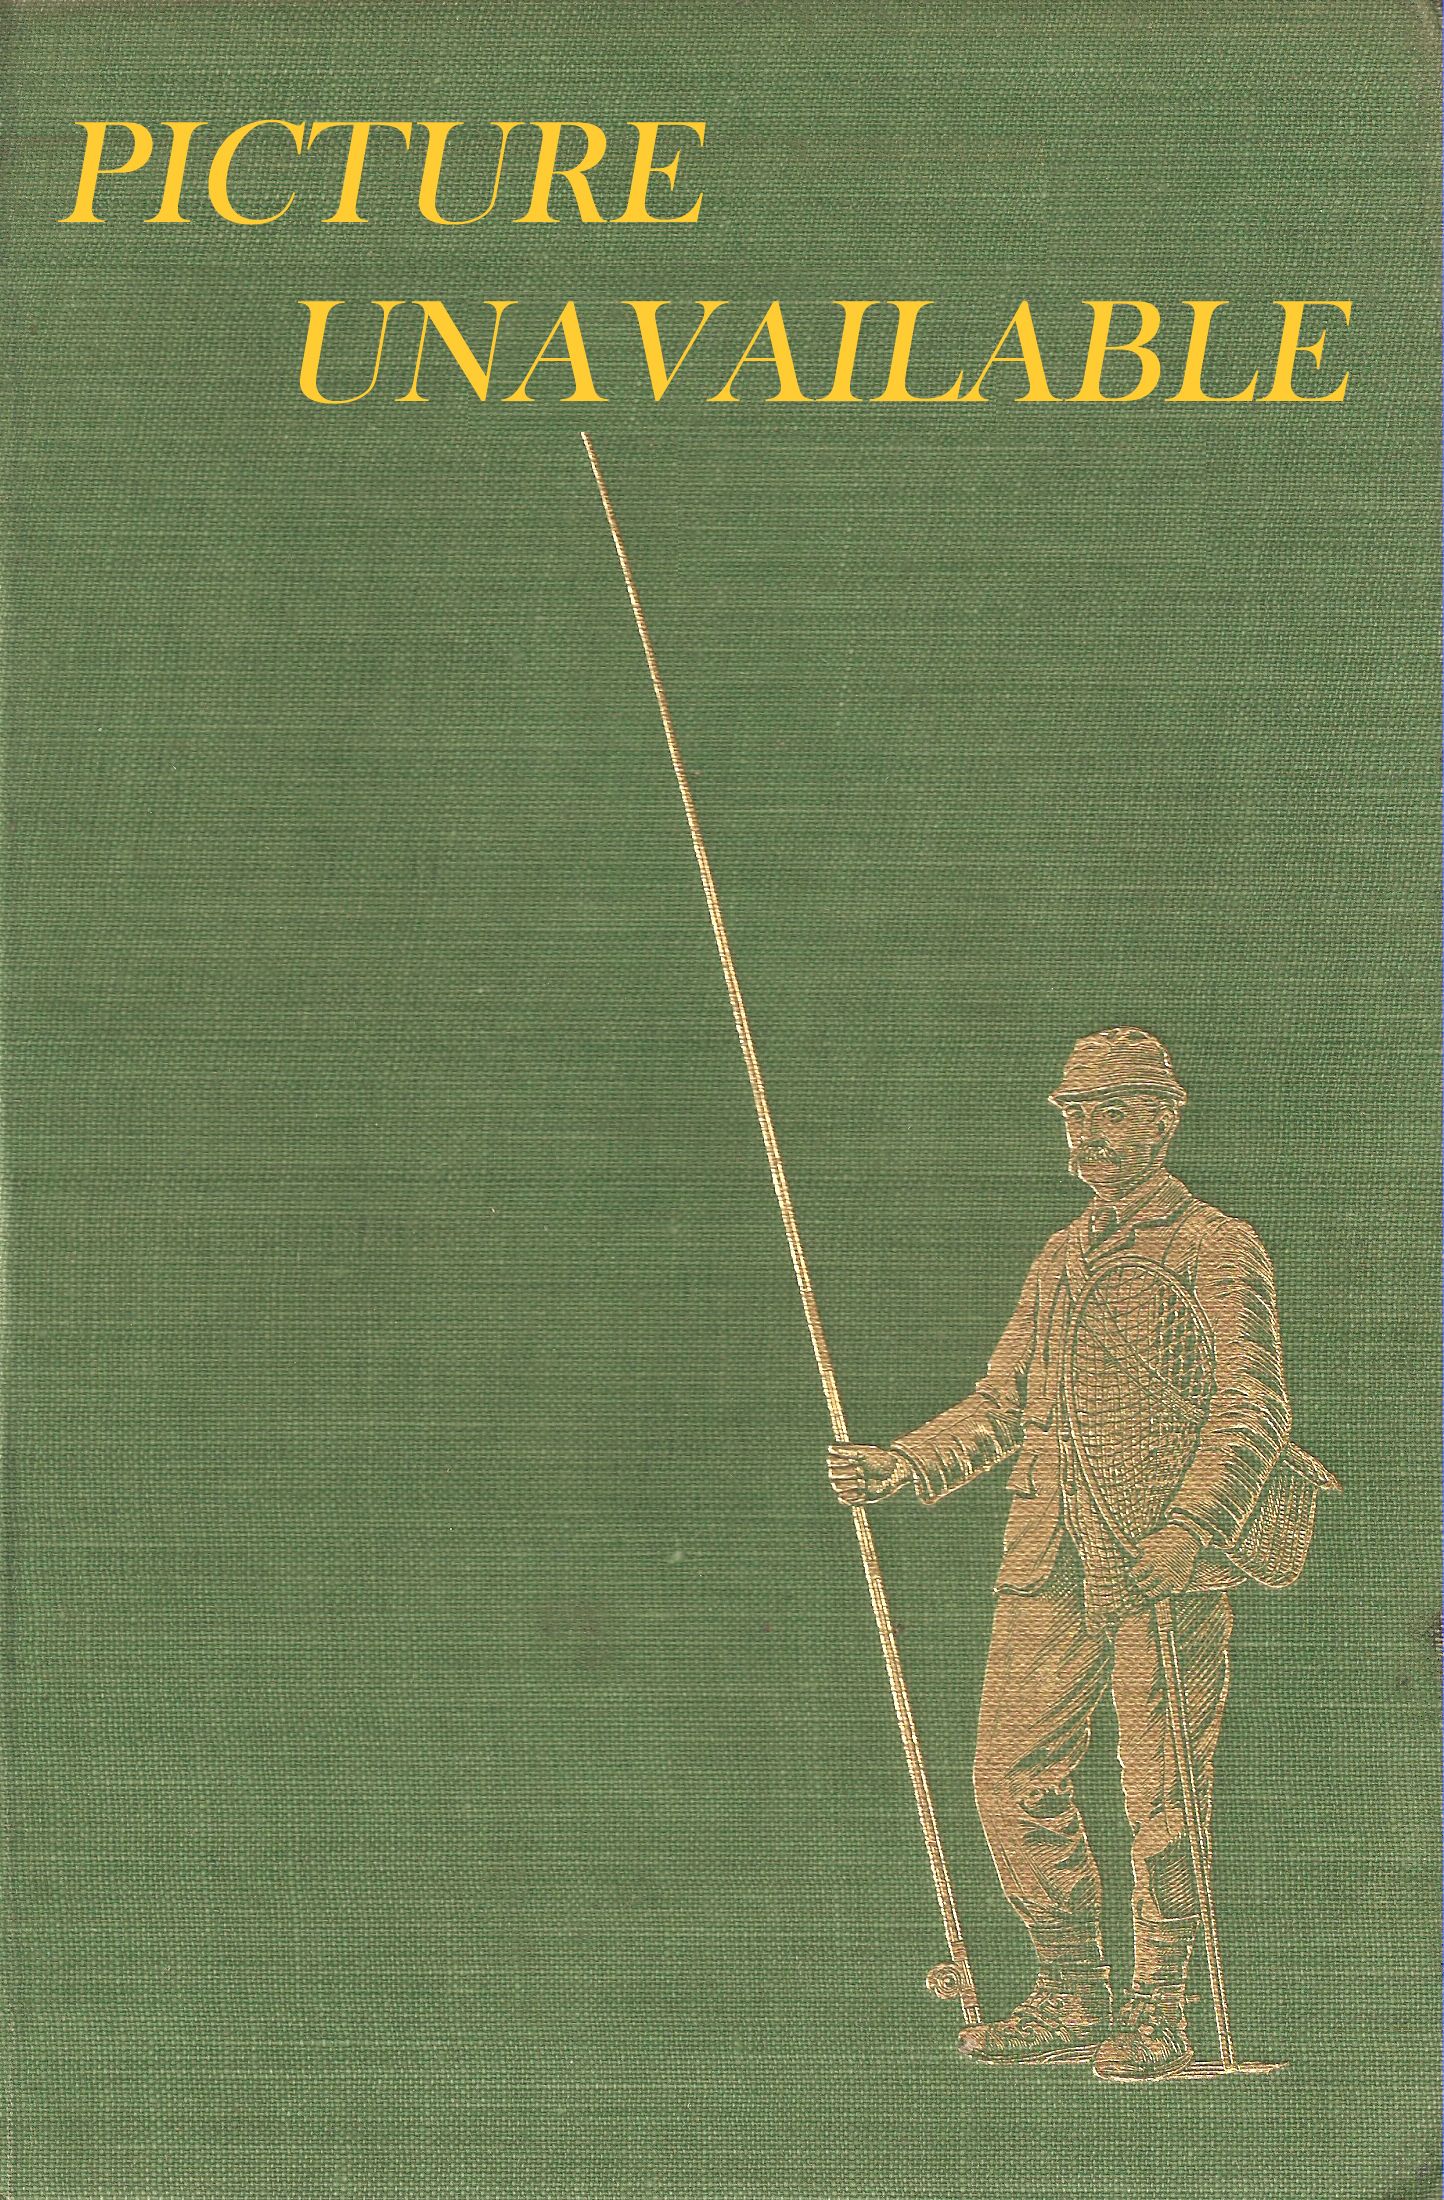 ROD AND STREAM: MISCELLANEOUS PAPERS ON THE SPORT OF FISHING. By Arthur Sharp.